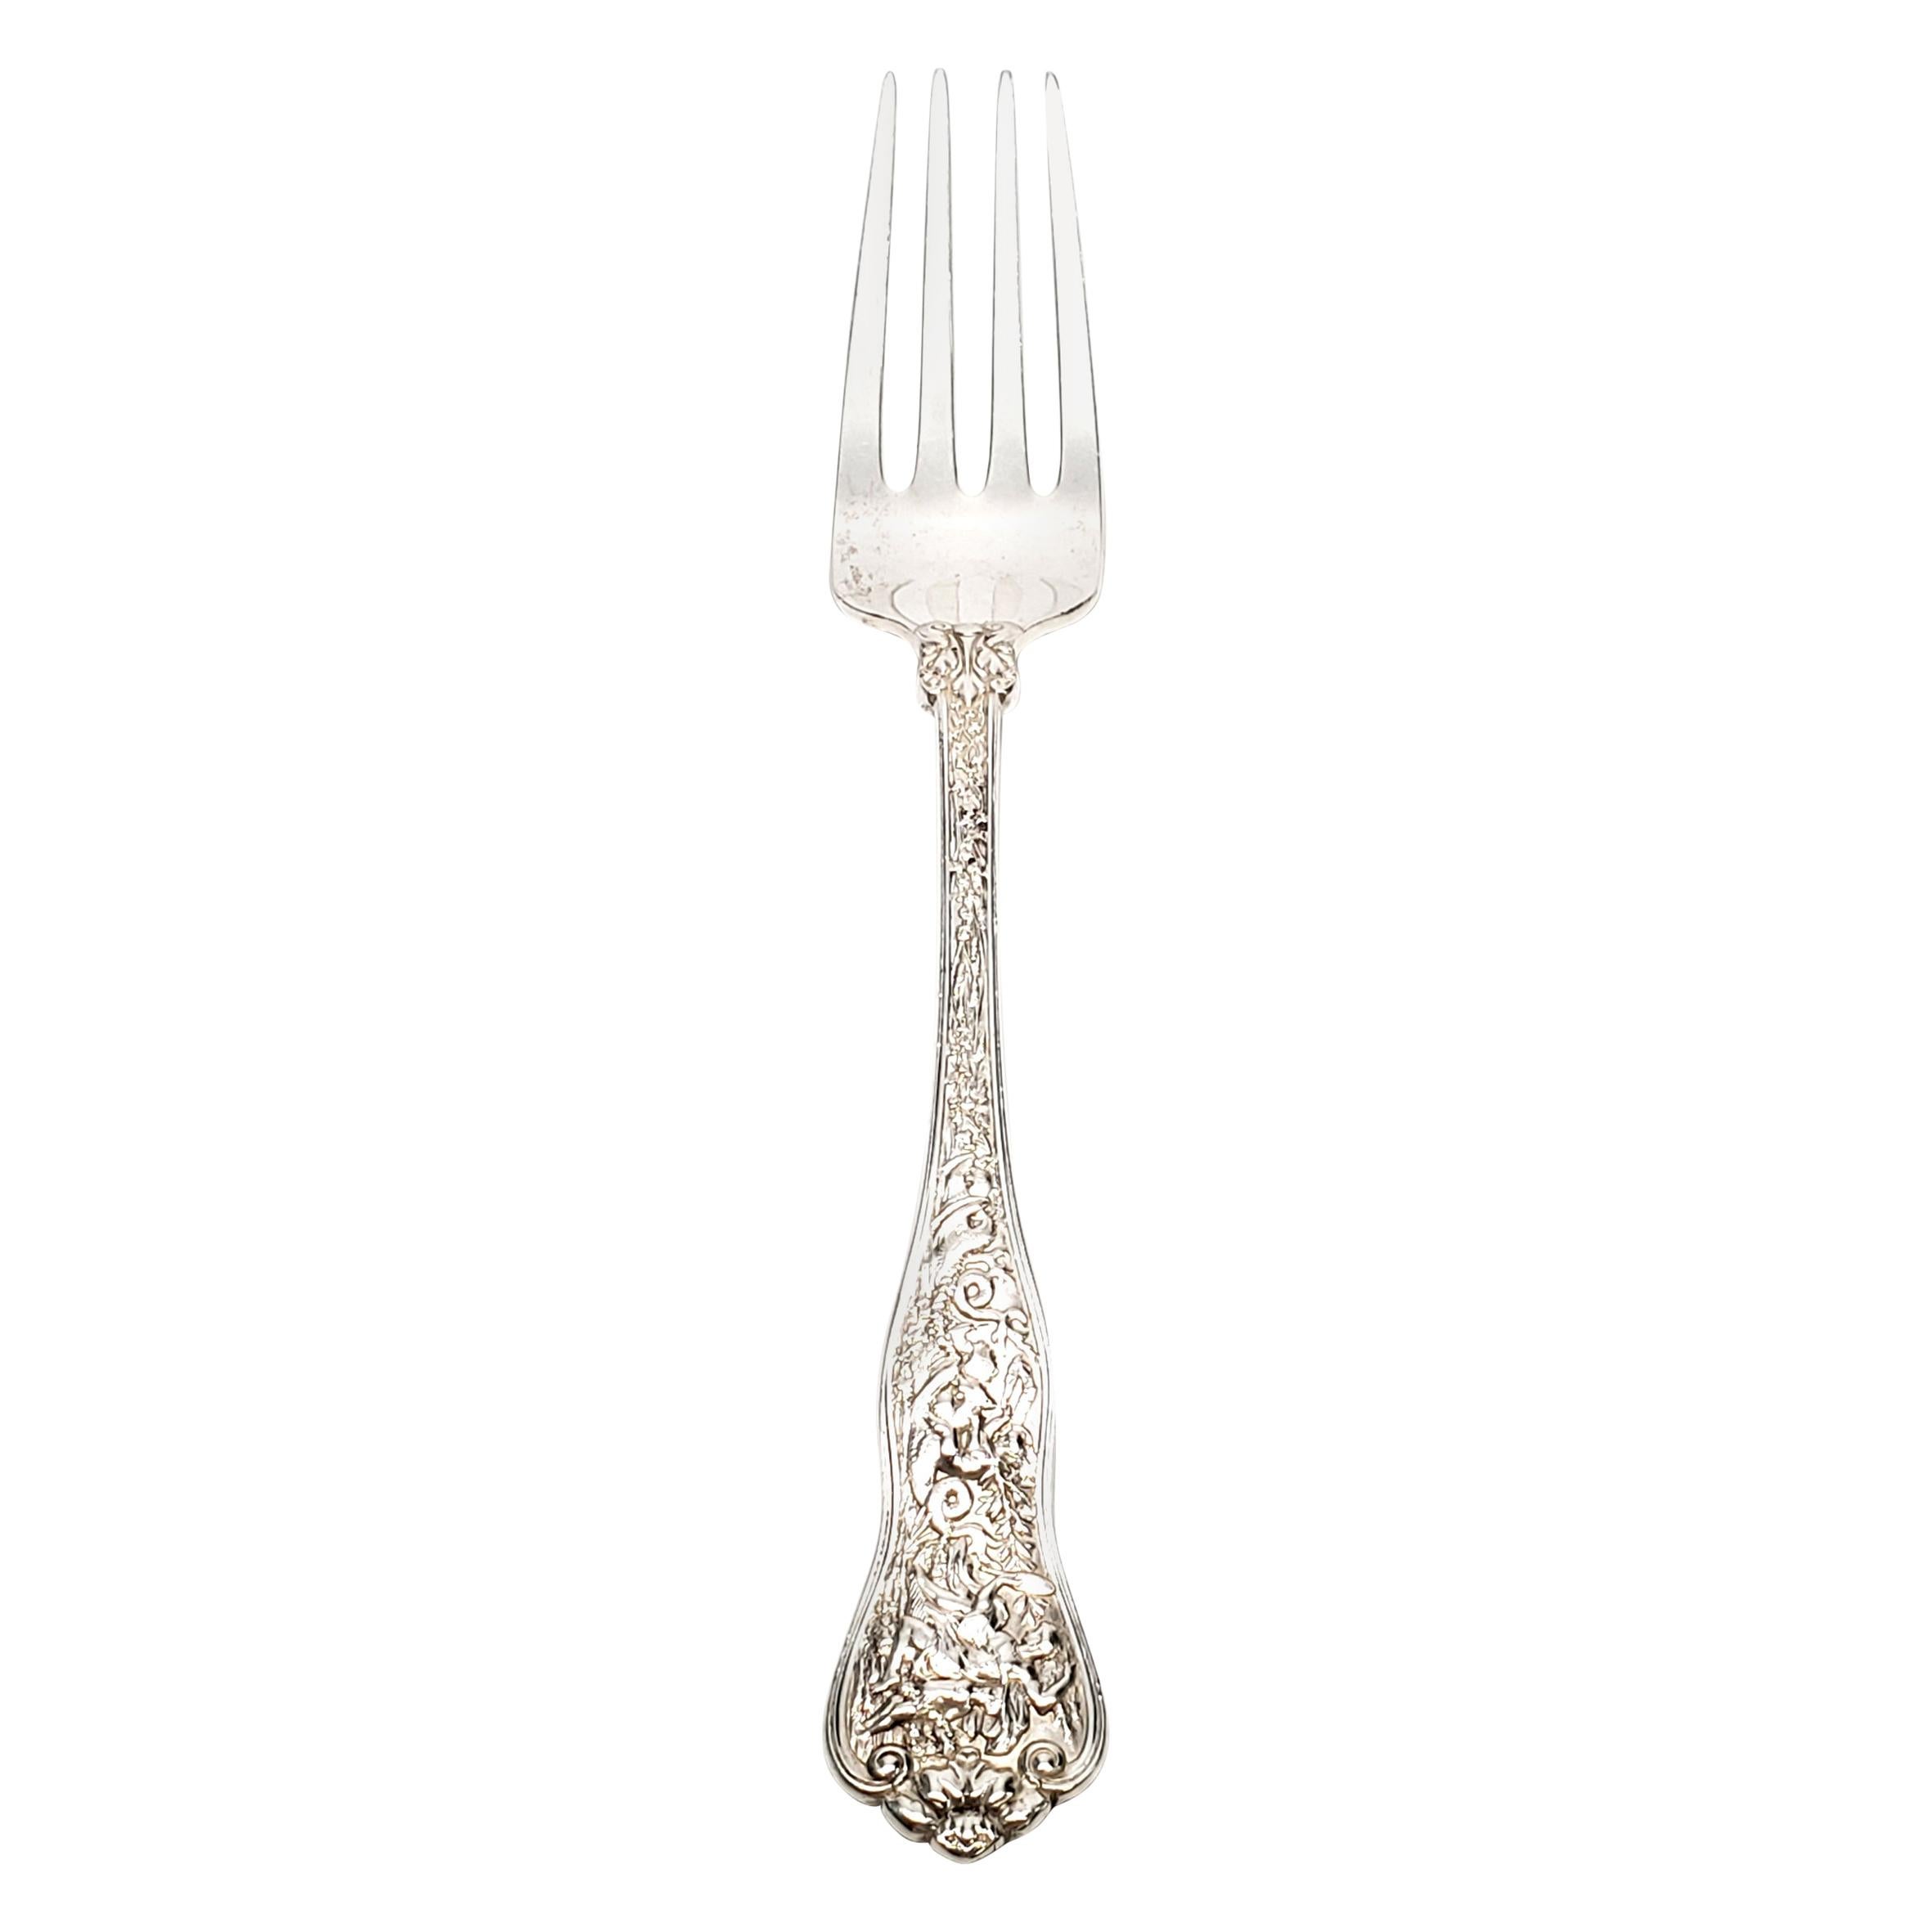 Tiffany & Co. 1878 Olympian Sterling Silver Serving Fork, No Monogram